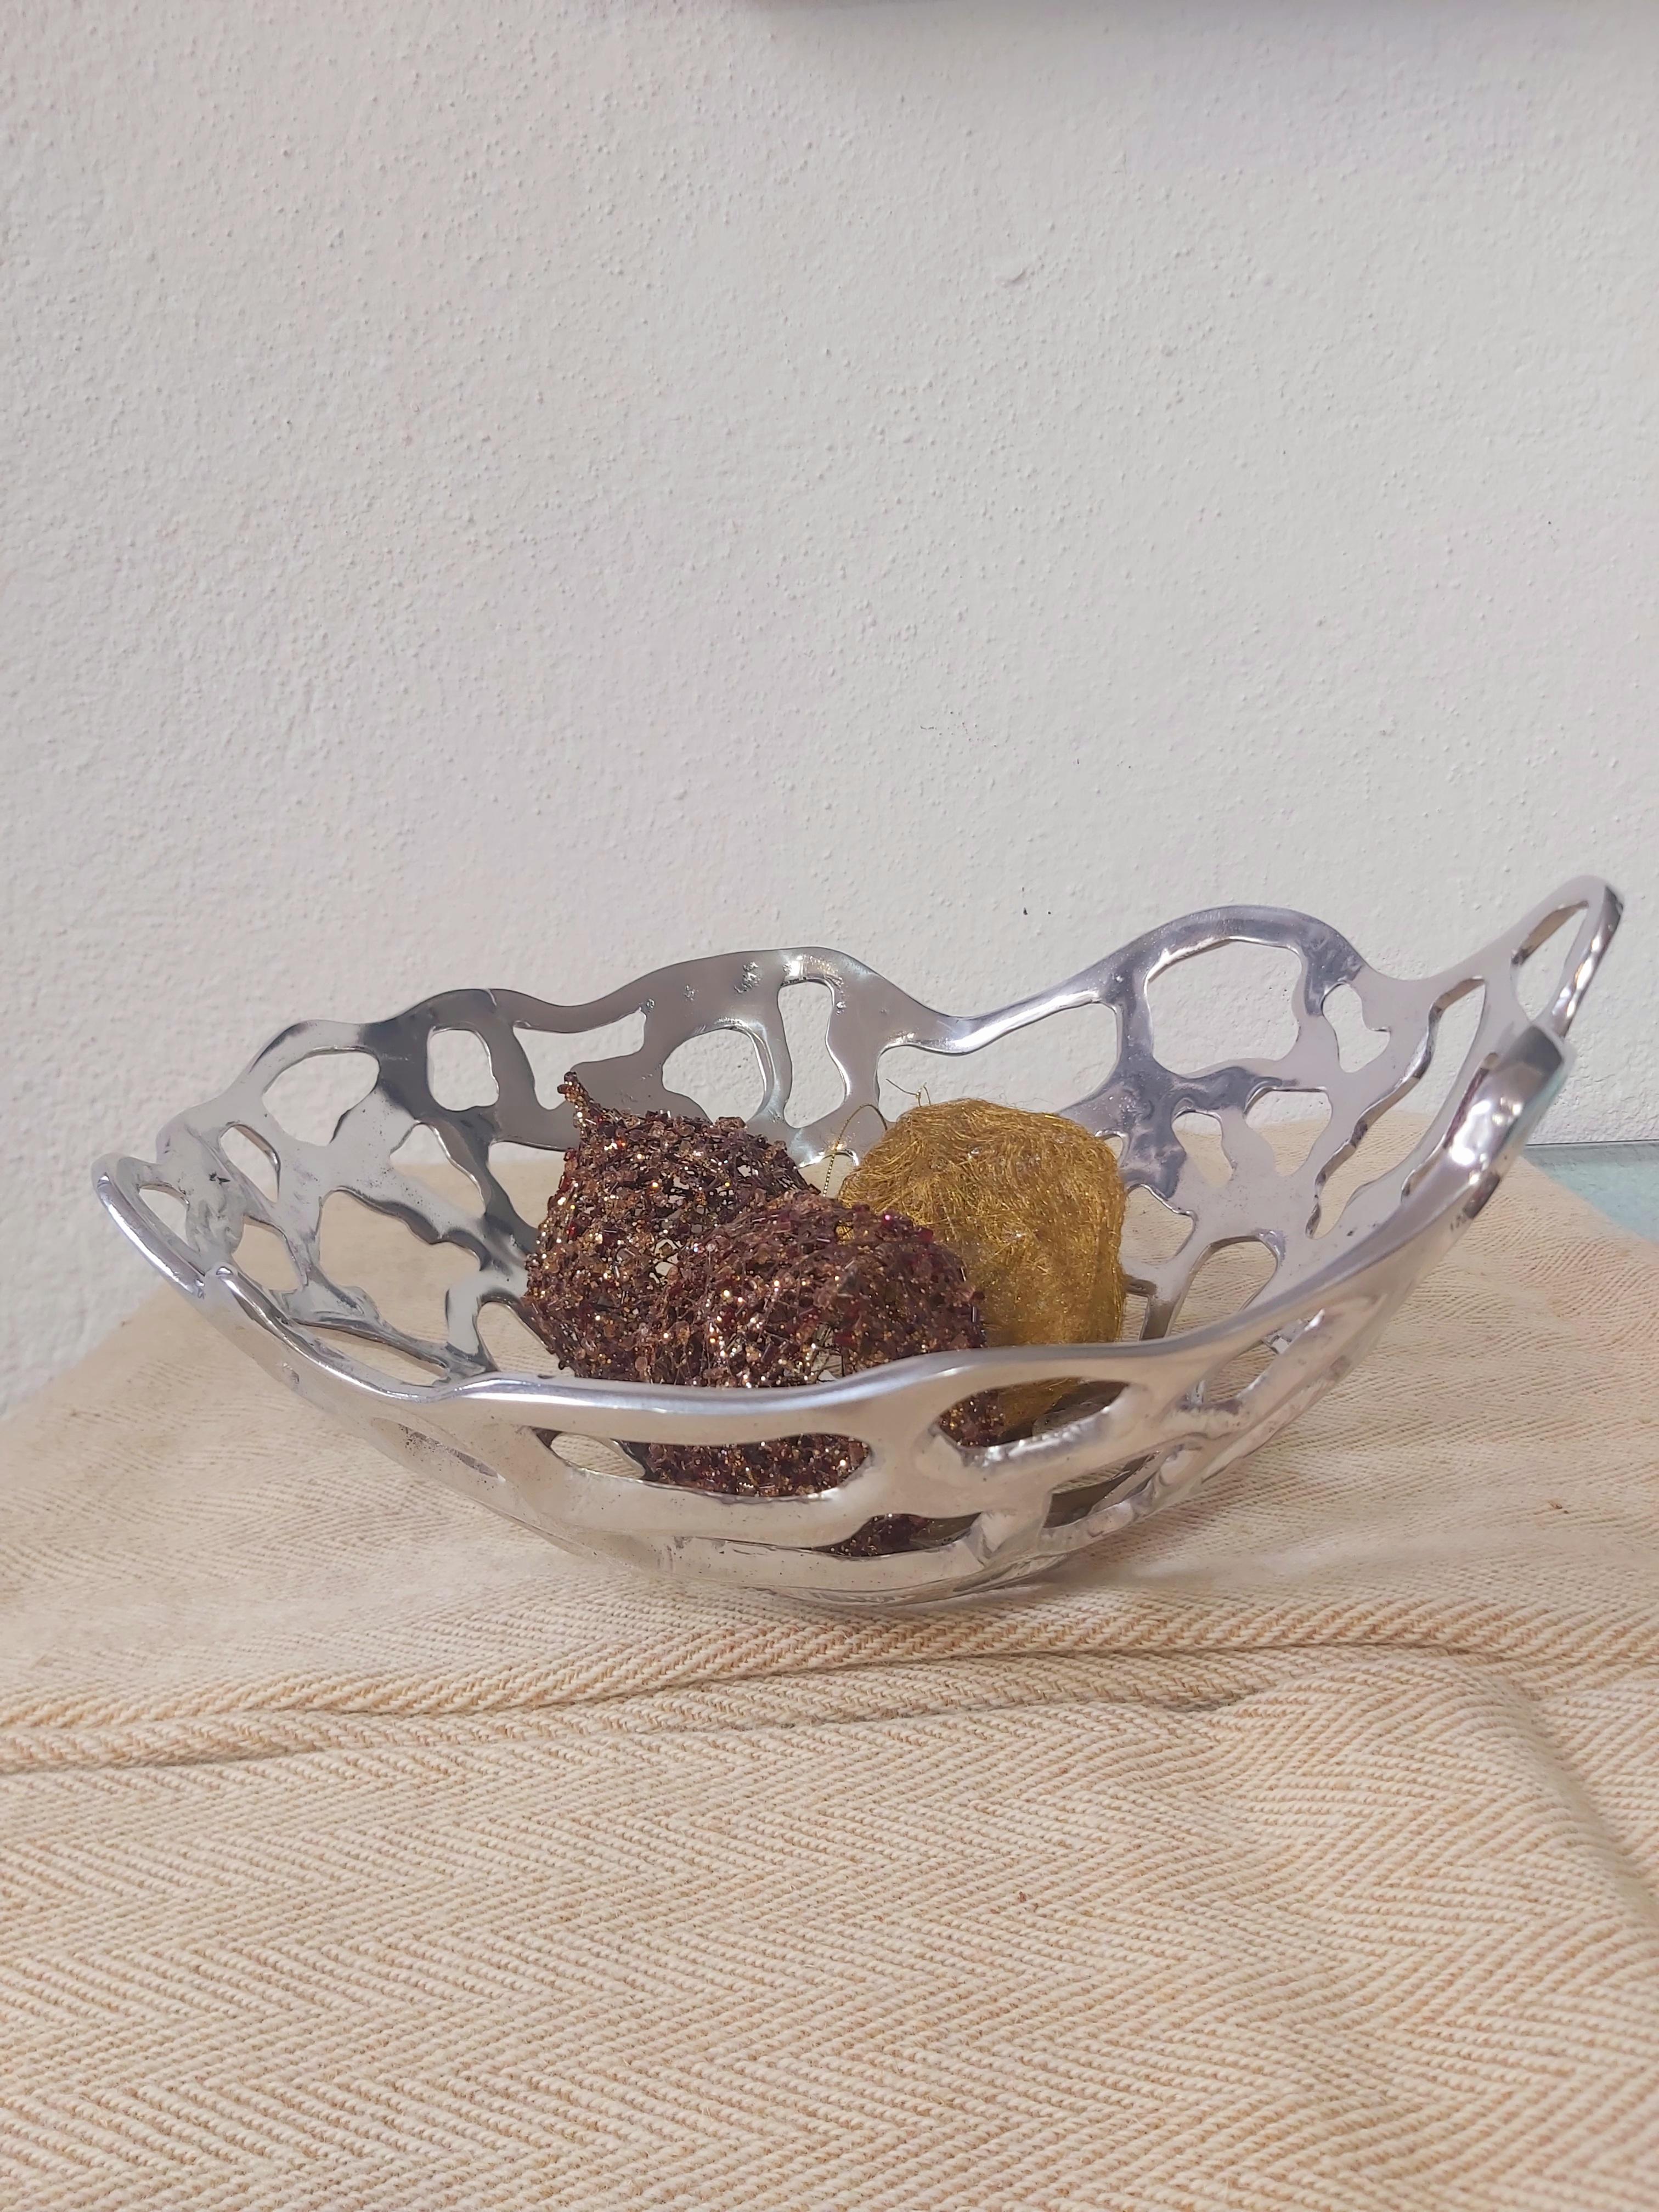 Decorative Object Abstract Metal Mesh Fruit Bowl Handmade in Spain Aluminium  For Sale 2